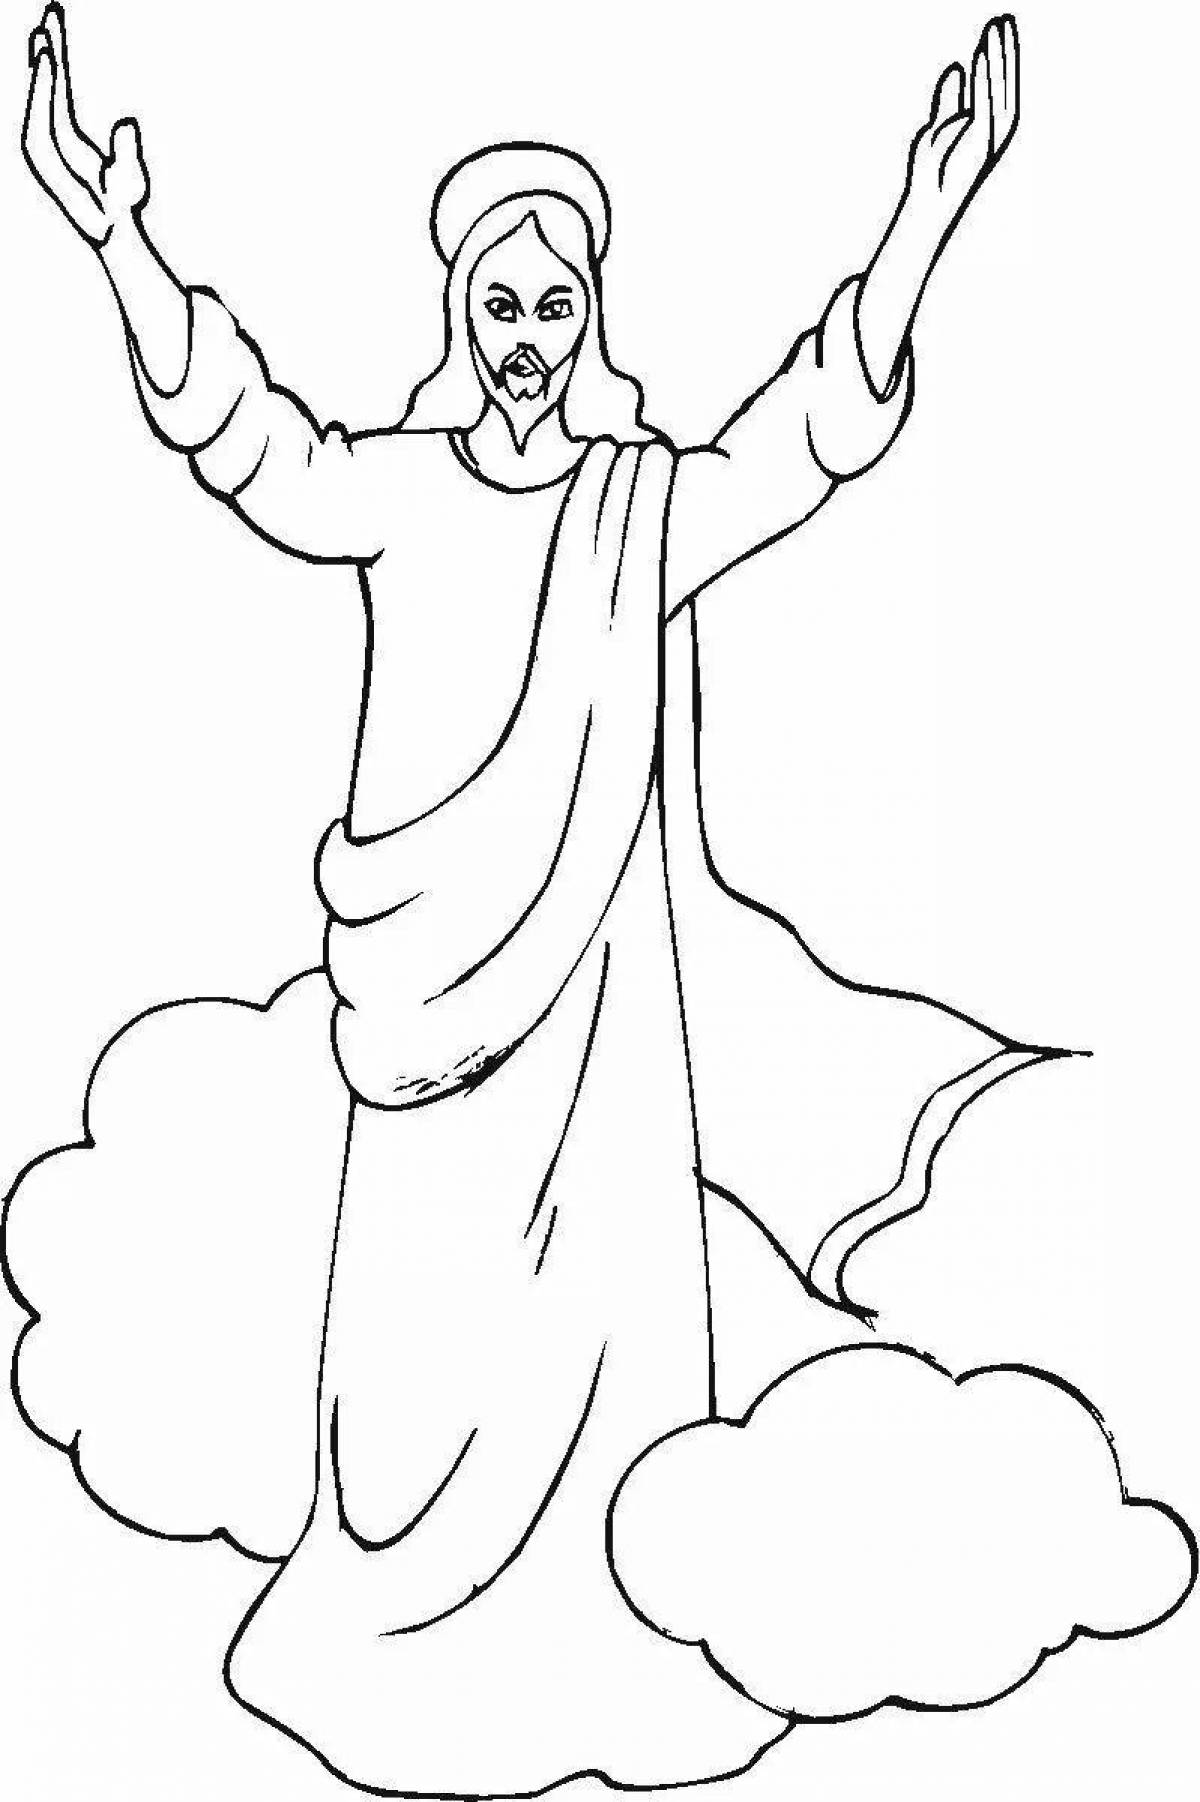 Glittering jesus christ coloring page